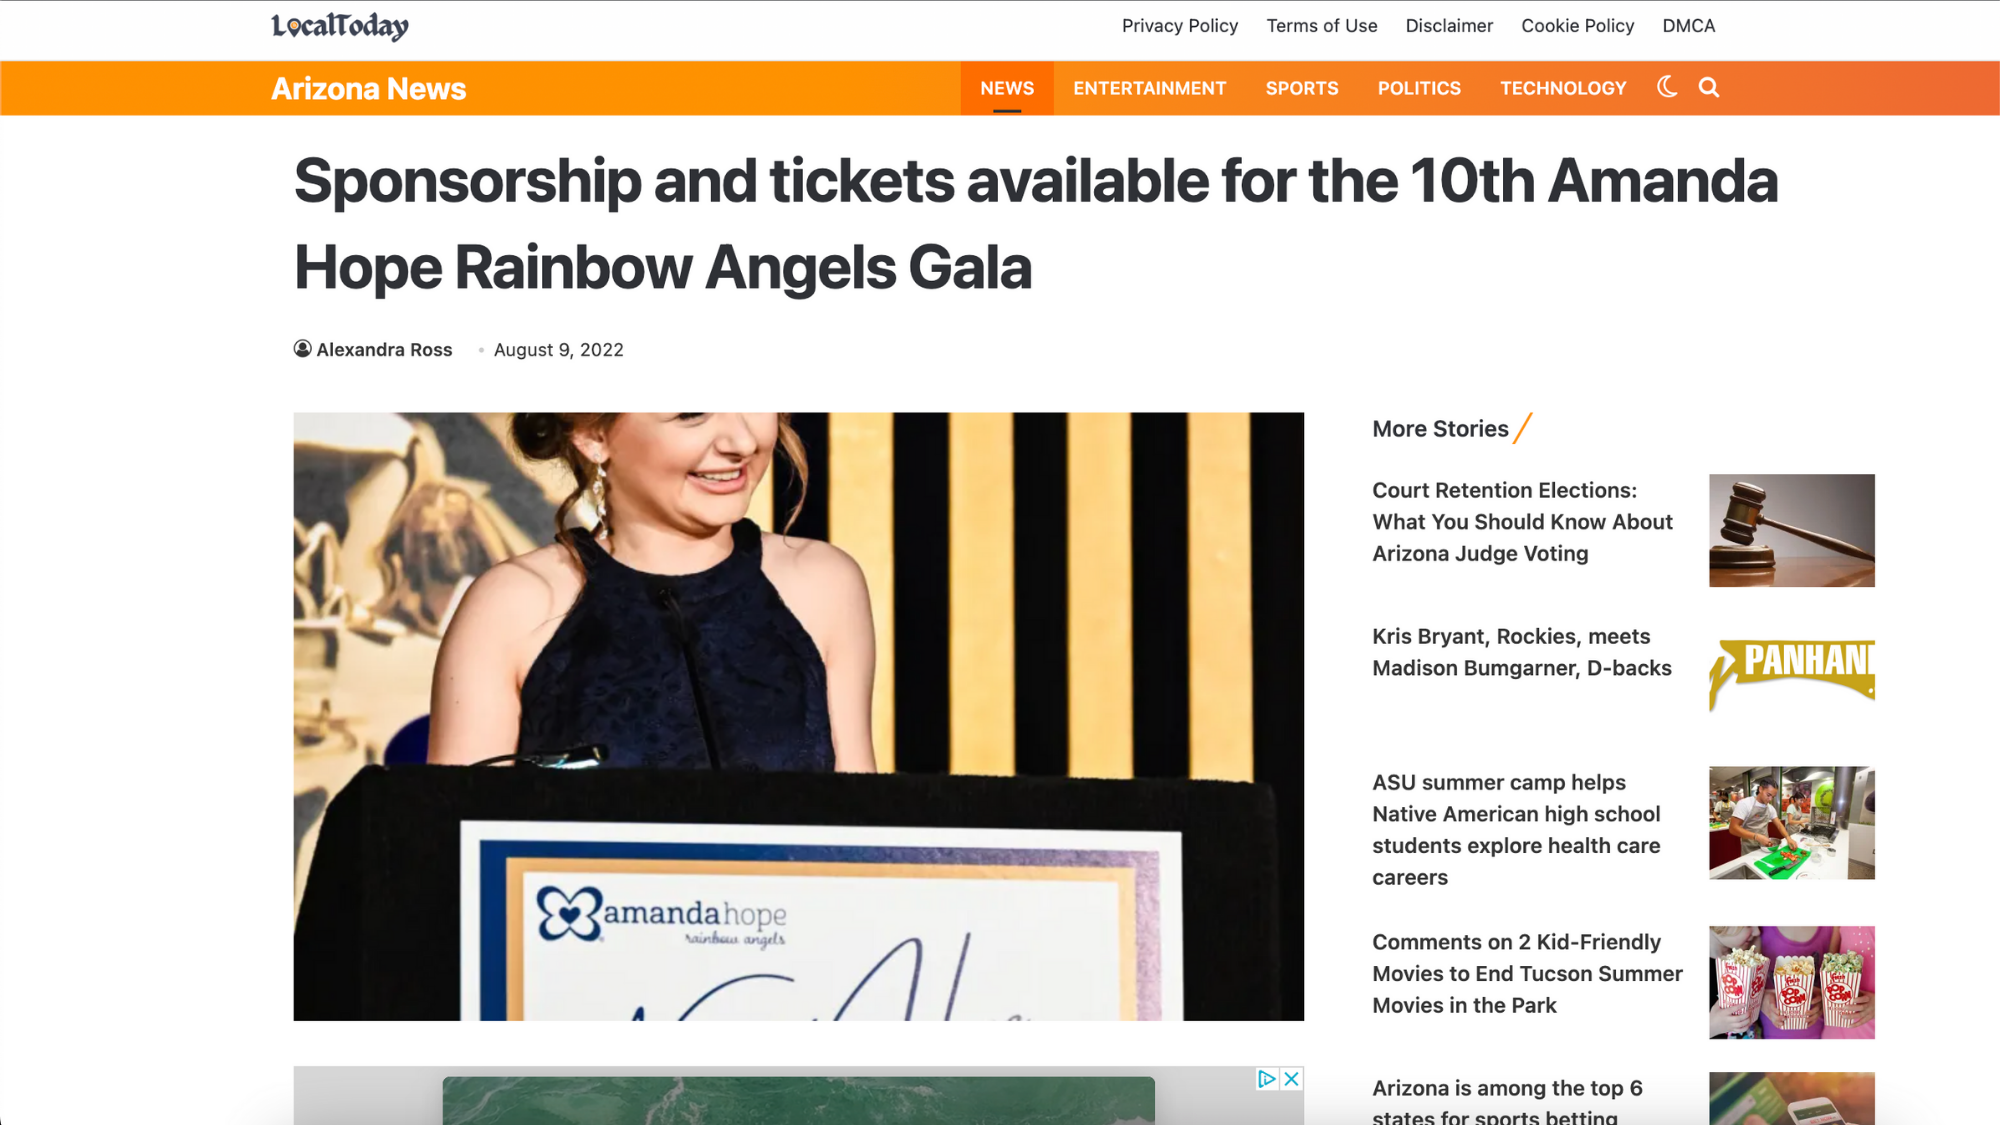 Local Today: Sponsorship and tickets available for the 10th Amanda Hope Rainbow Angels Gala (Copy)